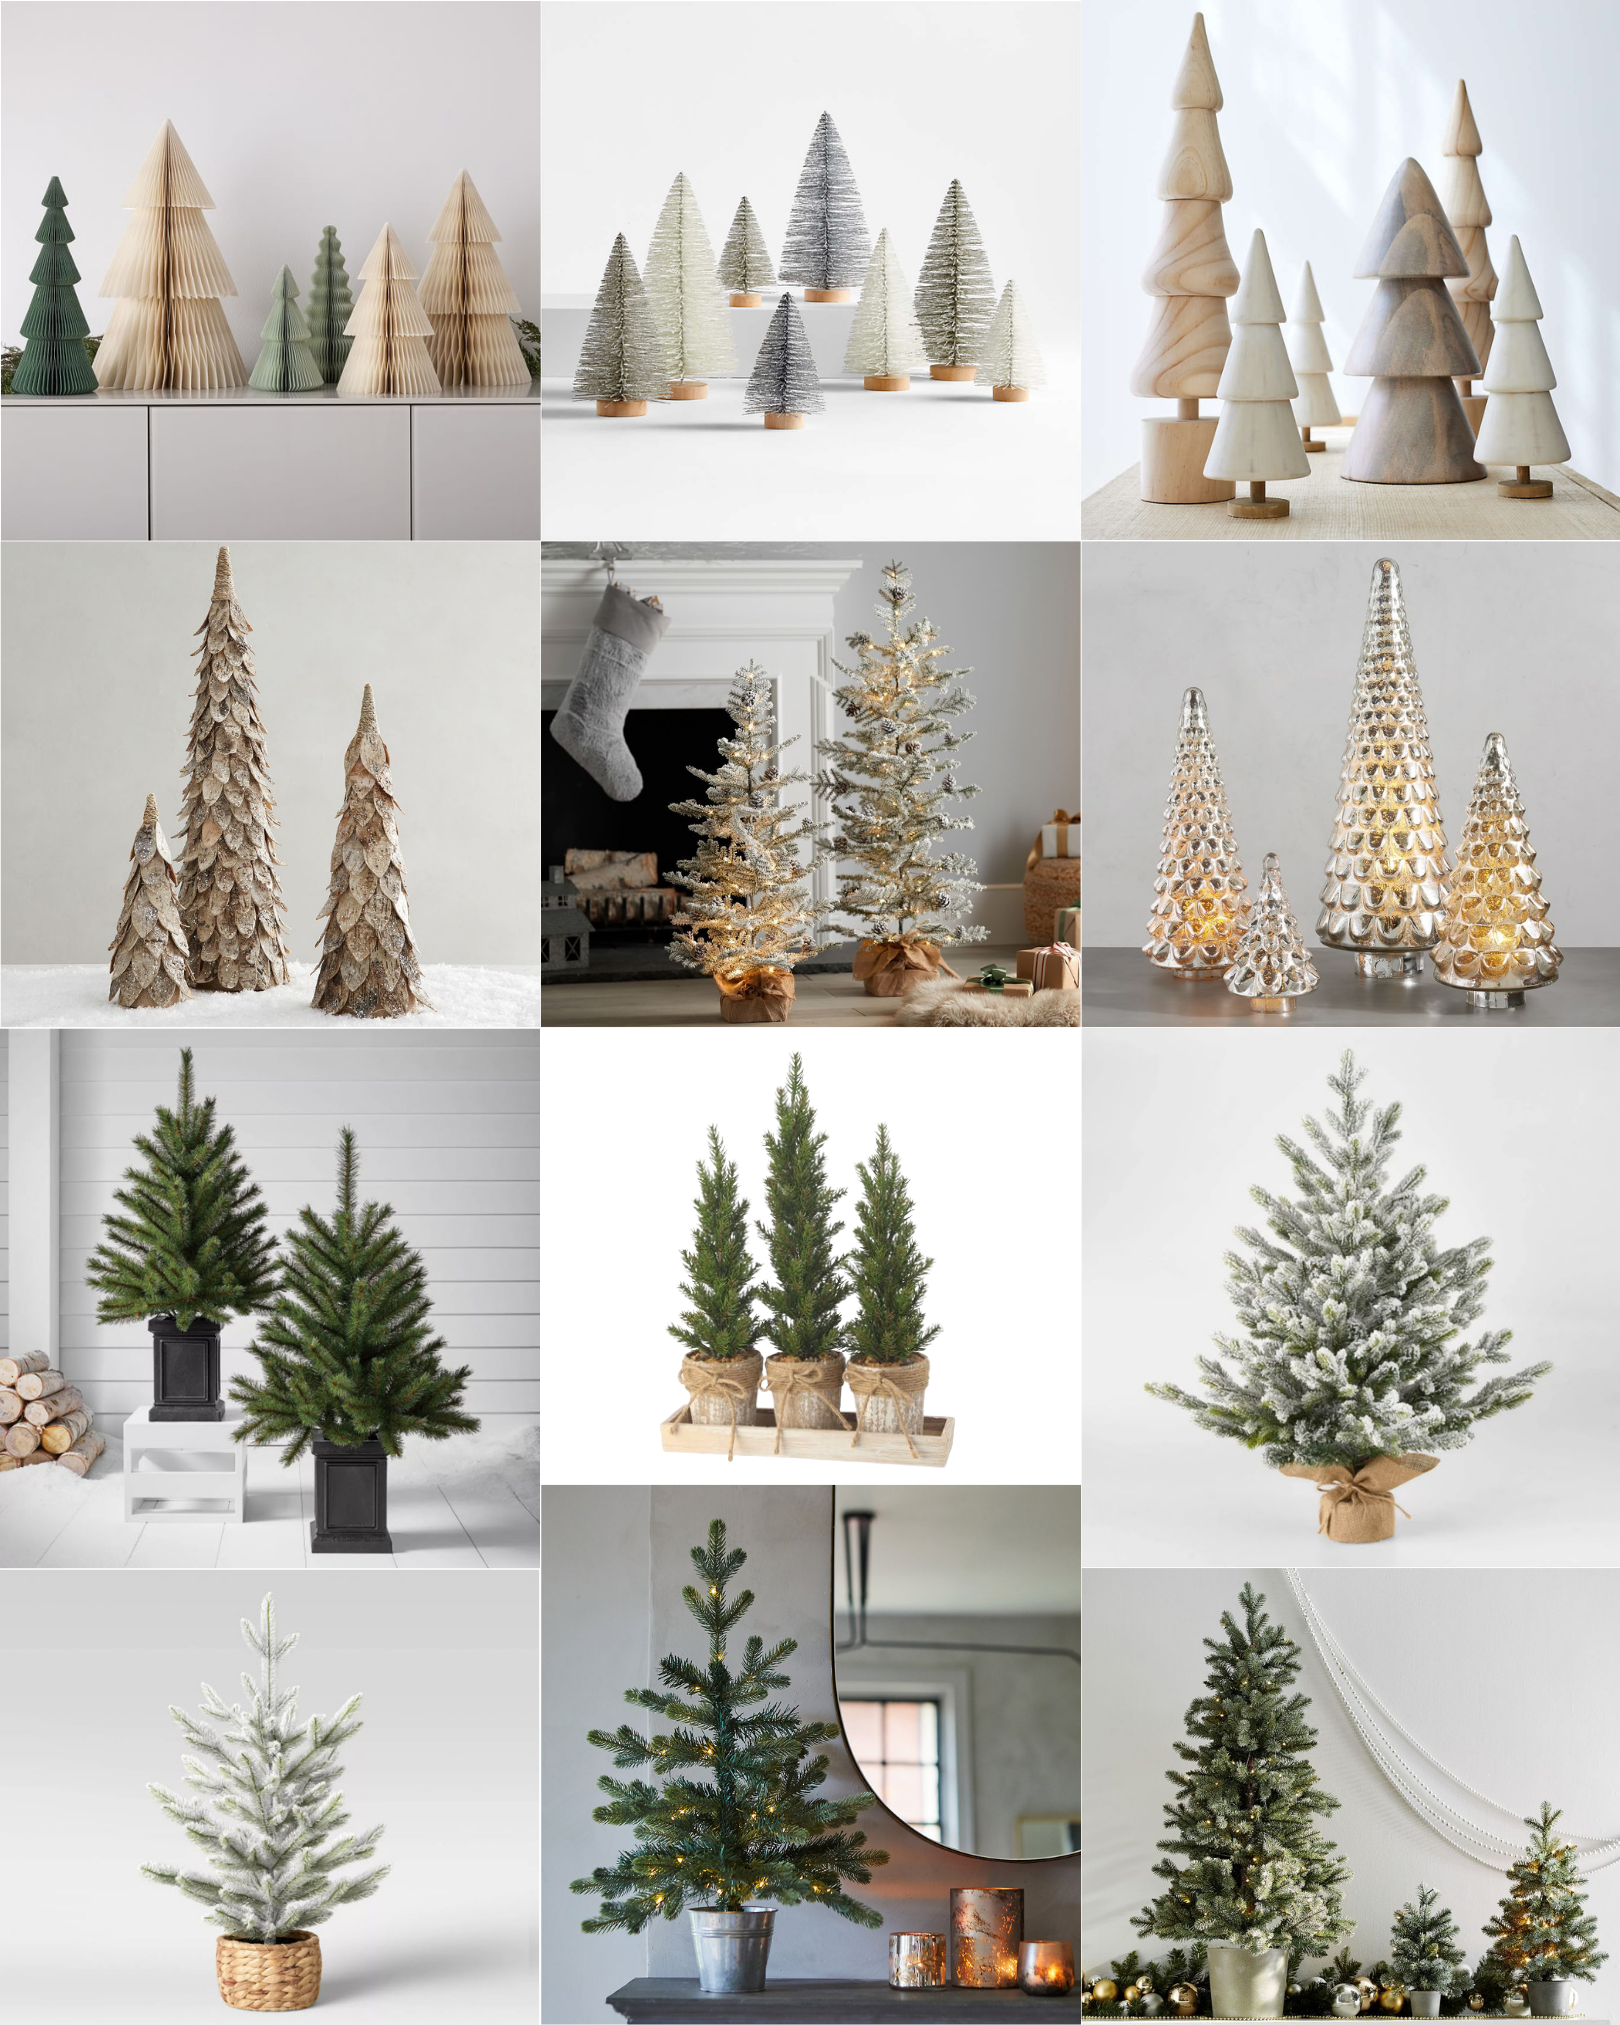 Yes, It is time to buy faux Christmas trees! The stores are are stocked with Holiday and if you don't purchase, you may miss out!